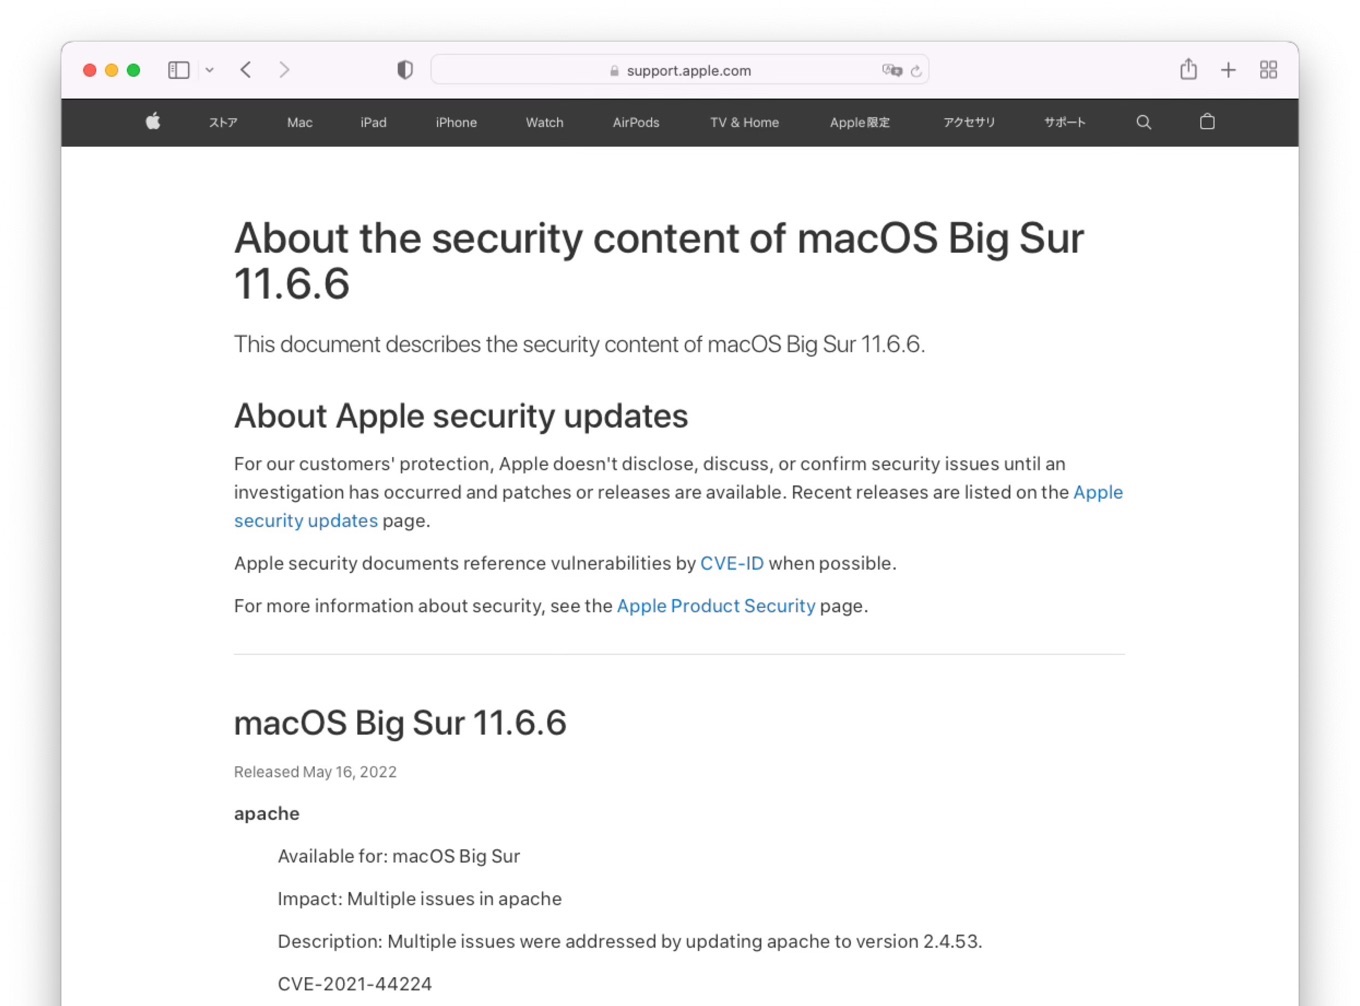 About the security content of macOS Big Sur 11.6.6